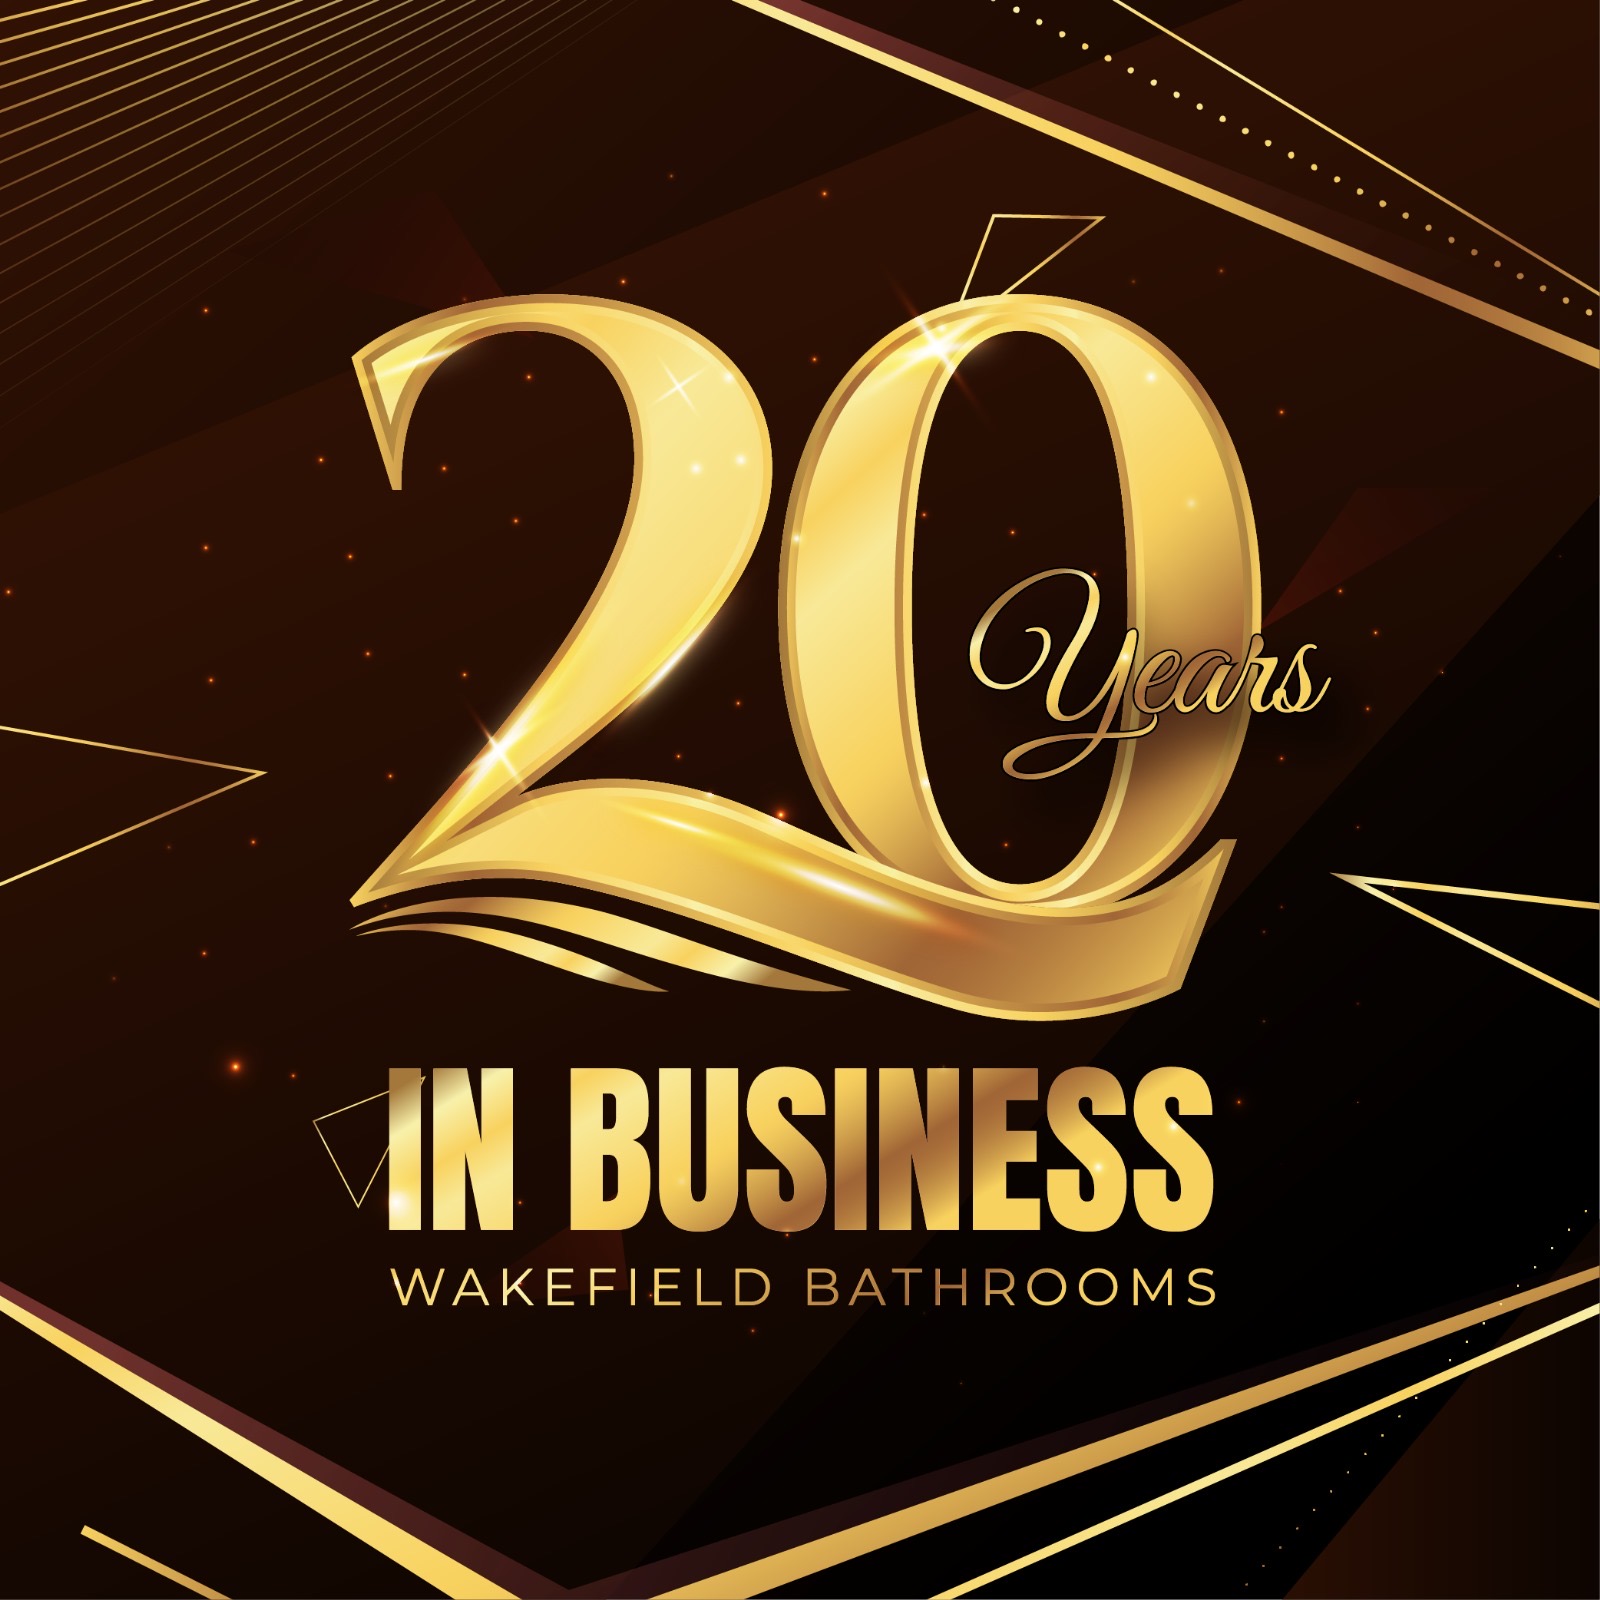 Celebrating 20 years in business!